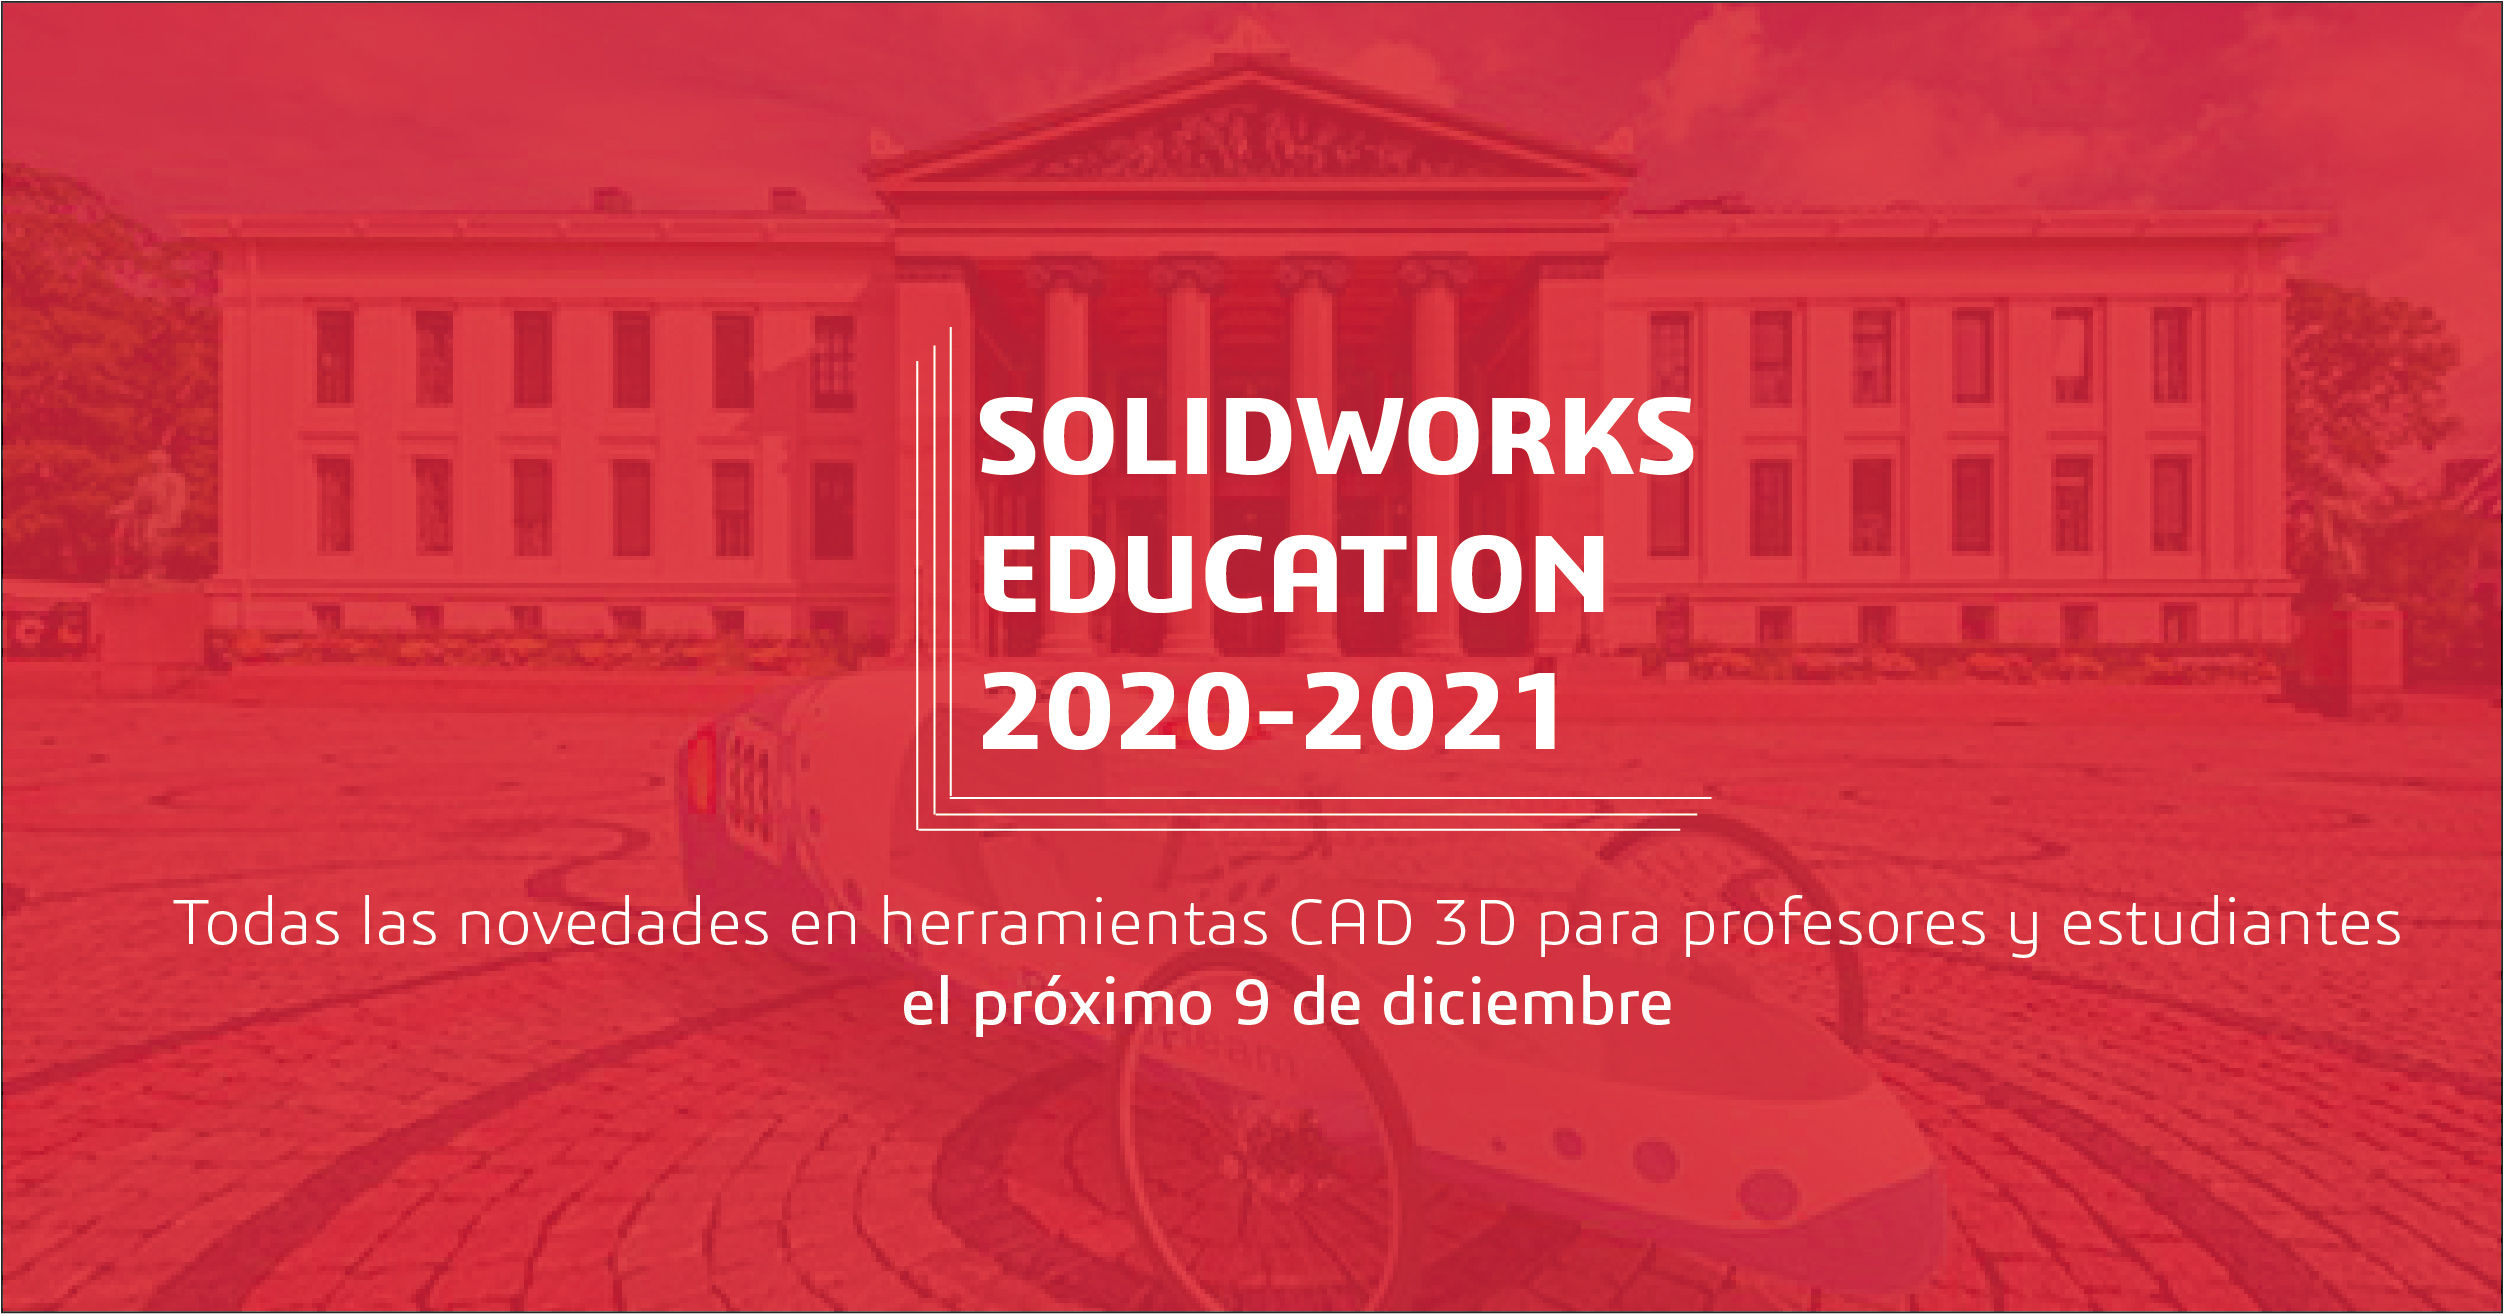 solidworks education